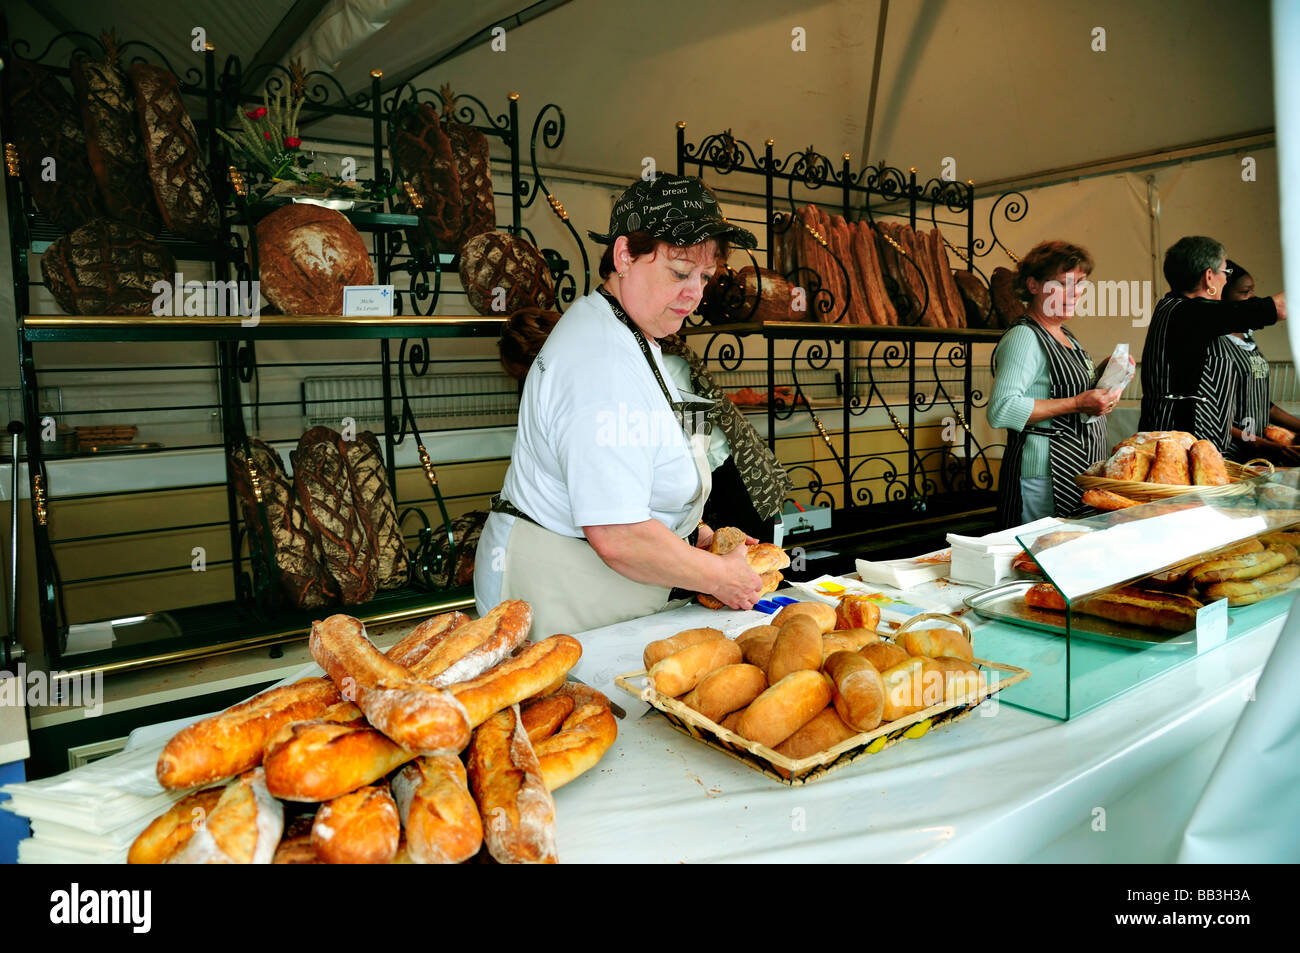 Paris France, French Artisan Bakery Store Inside Female Clerk with French Breads at 'Fete du Pain' 'Bread Festival' baguettes, bakery counter france, Stock Photo